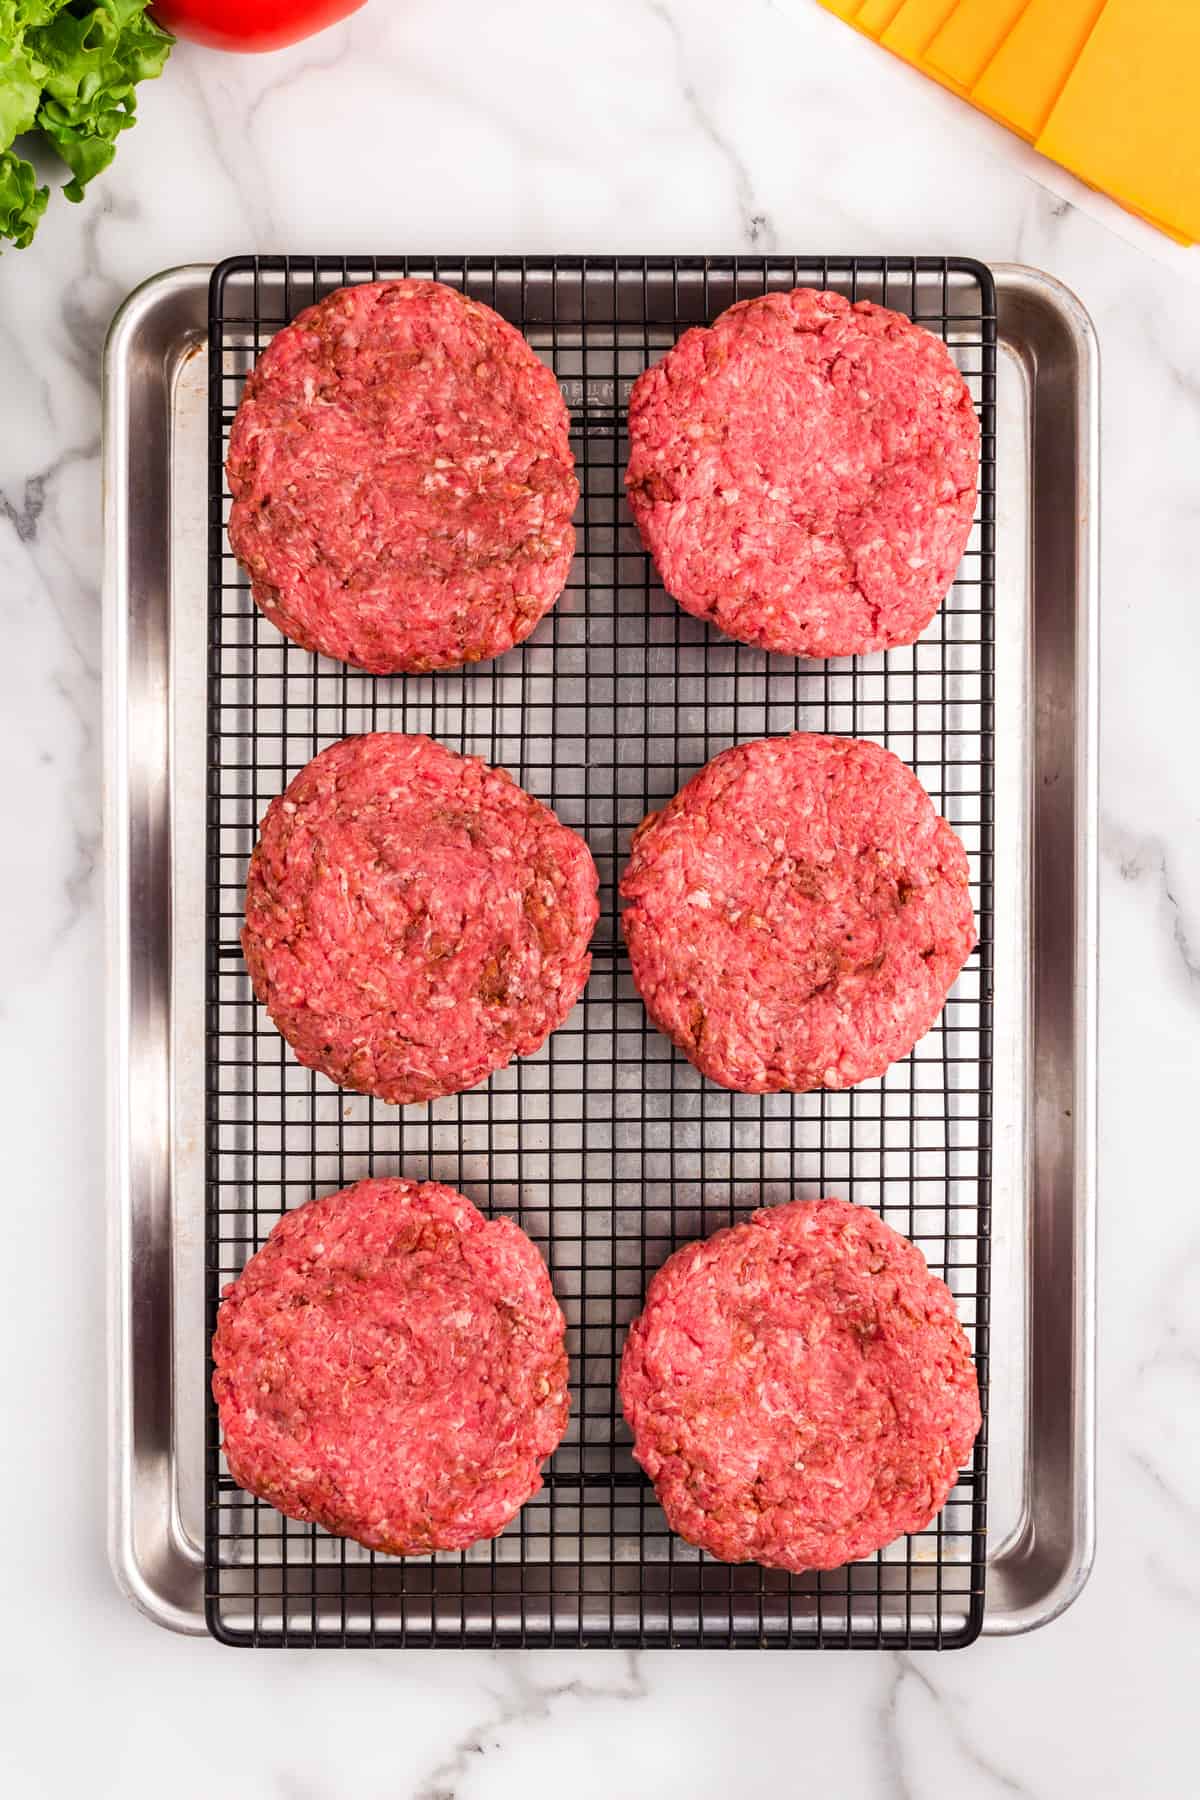 Seasoned ground beef patties on cooking grate for Baked Hamburgers recipe